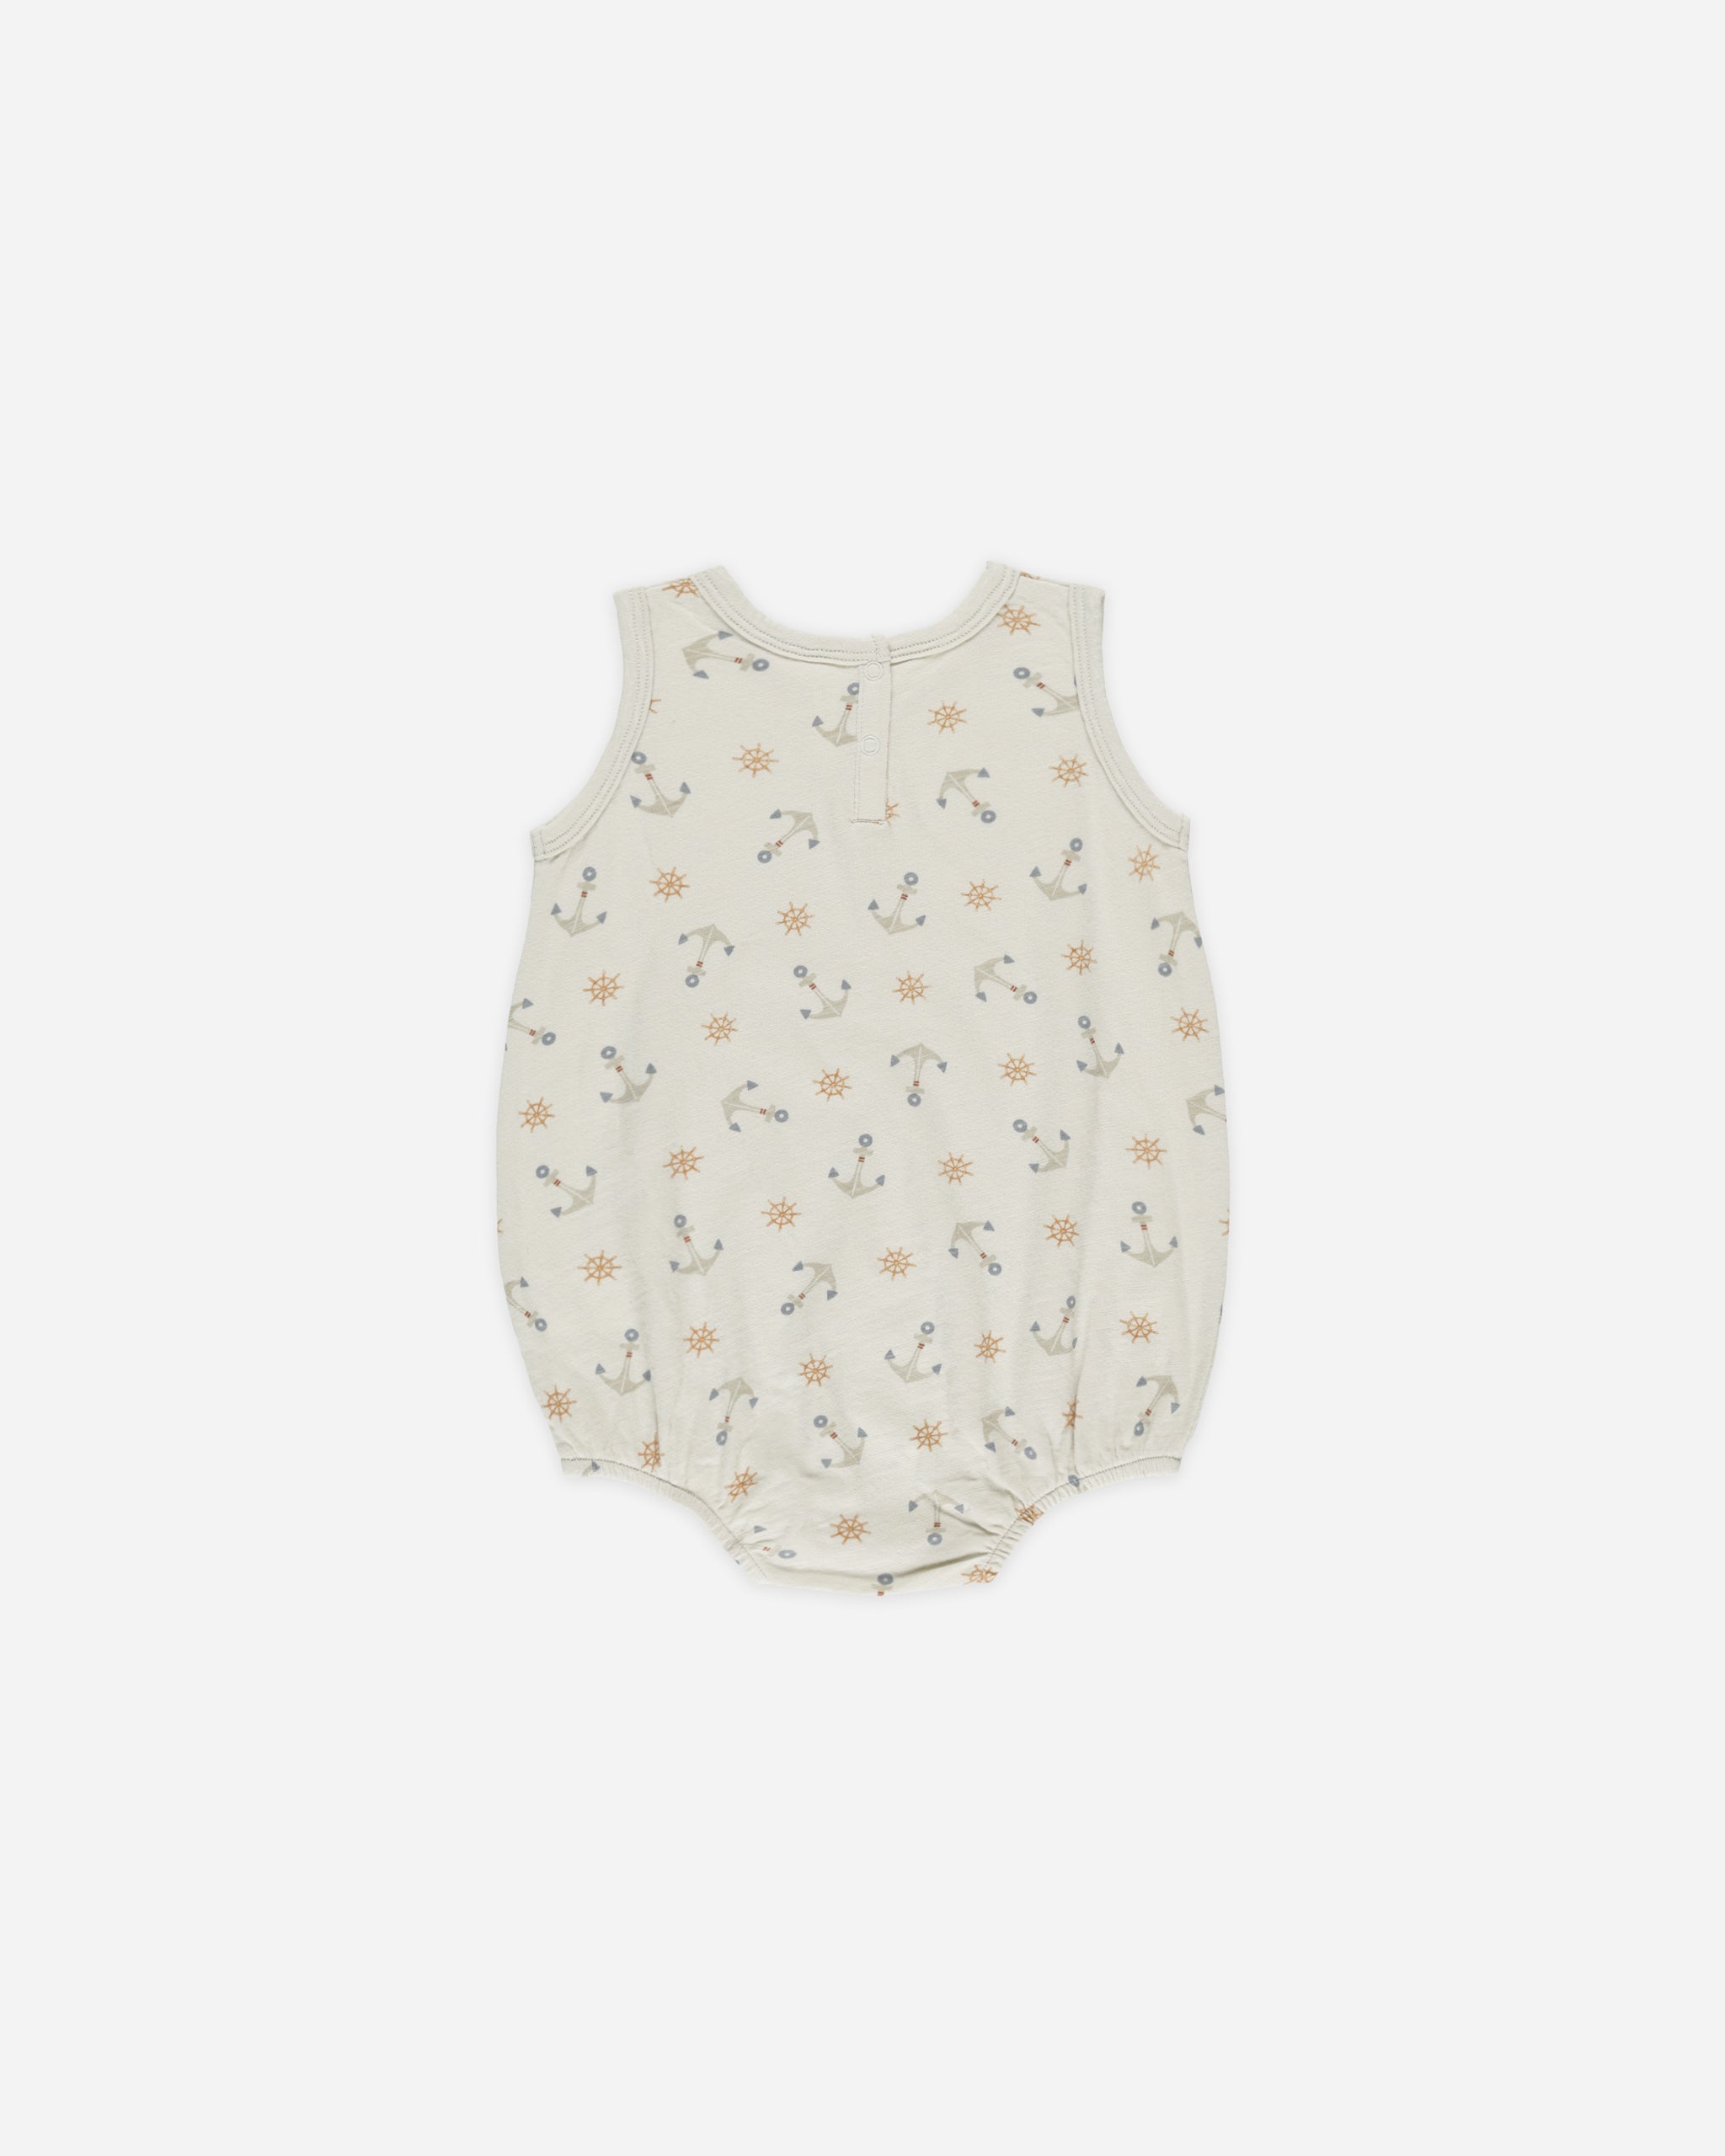 Bubble Onesie || Anchors - Rylee + Cru | Kids Clothes | Trendy Baby Clothes | Modern Infant Outfits |